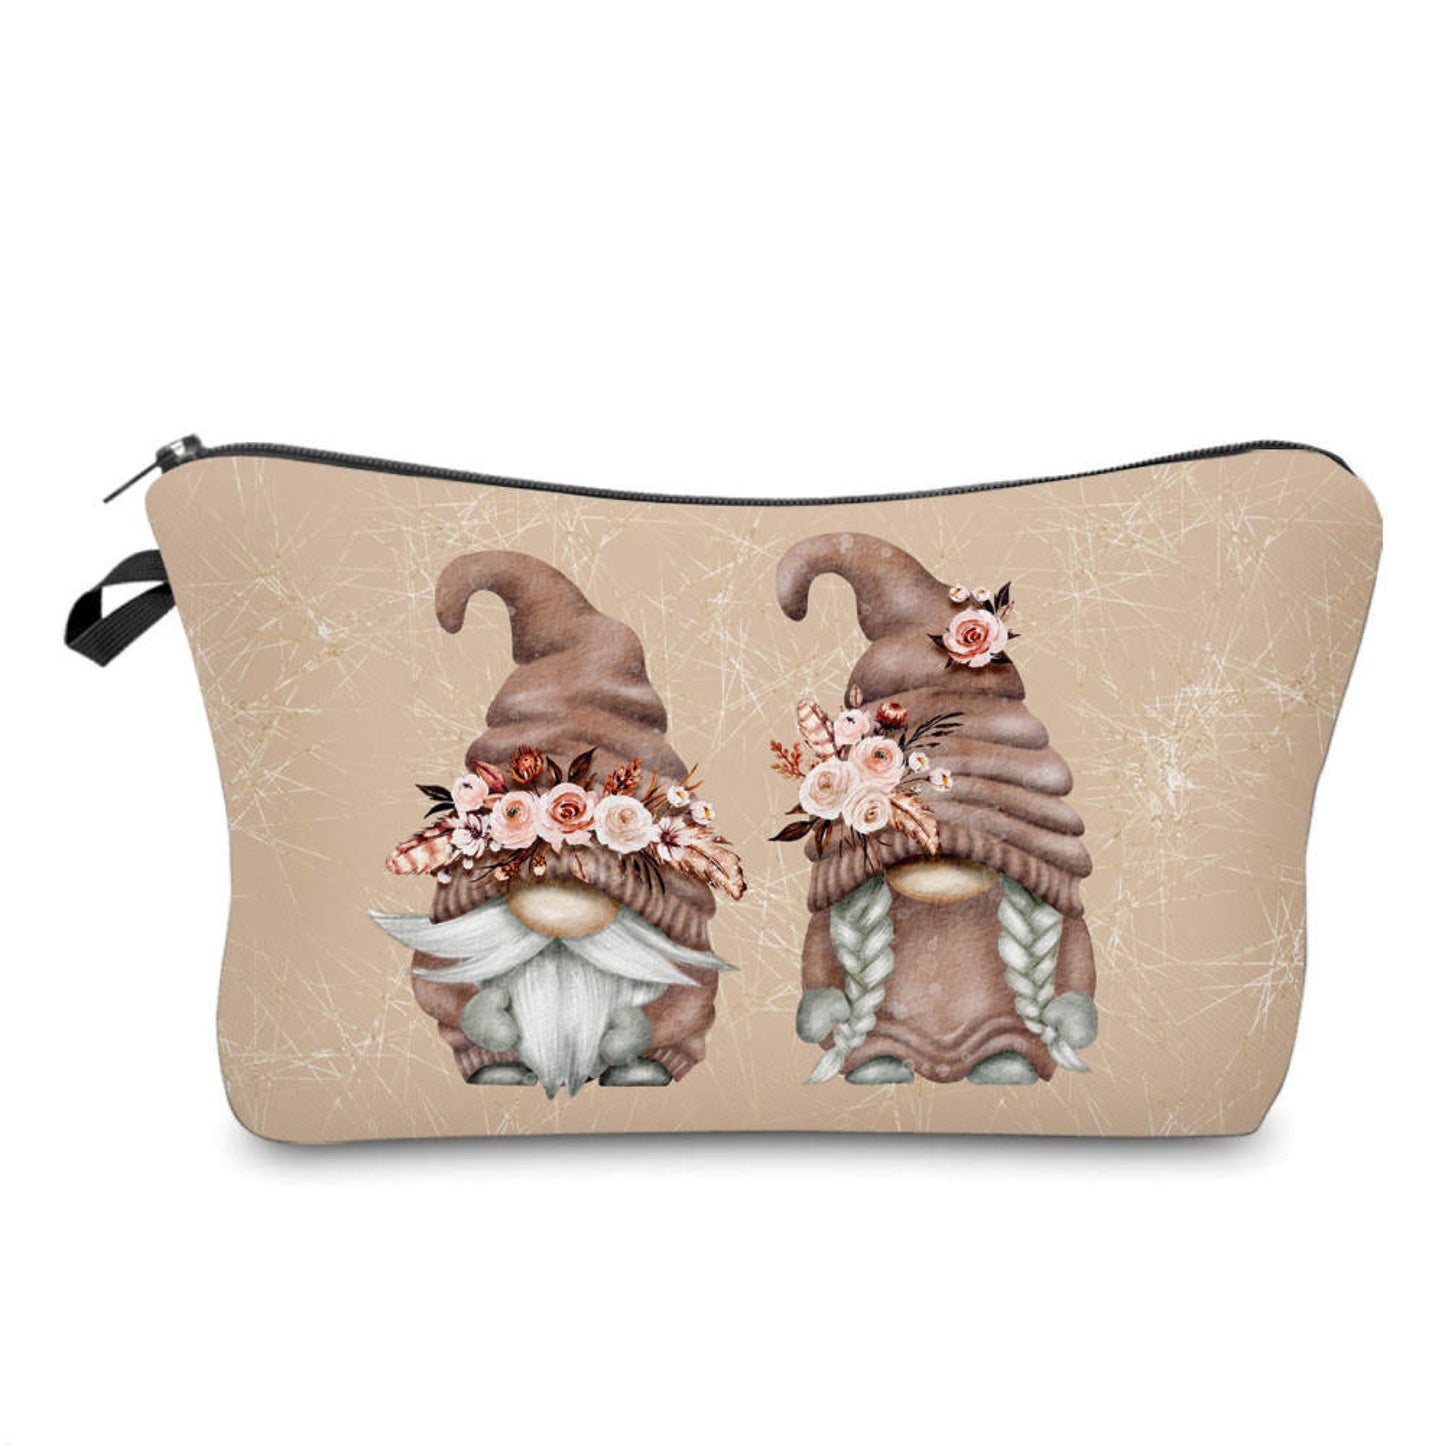 Pouch - Gnome Brown Floral